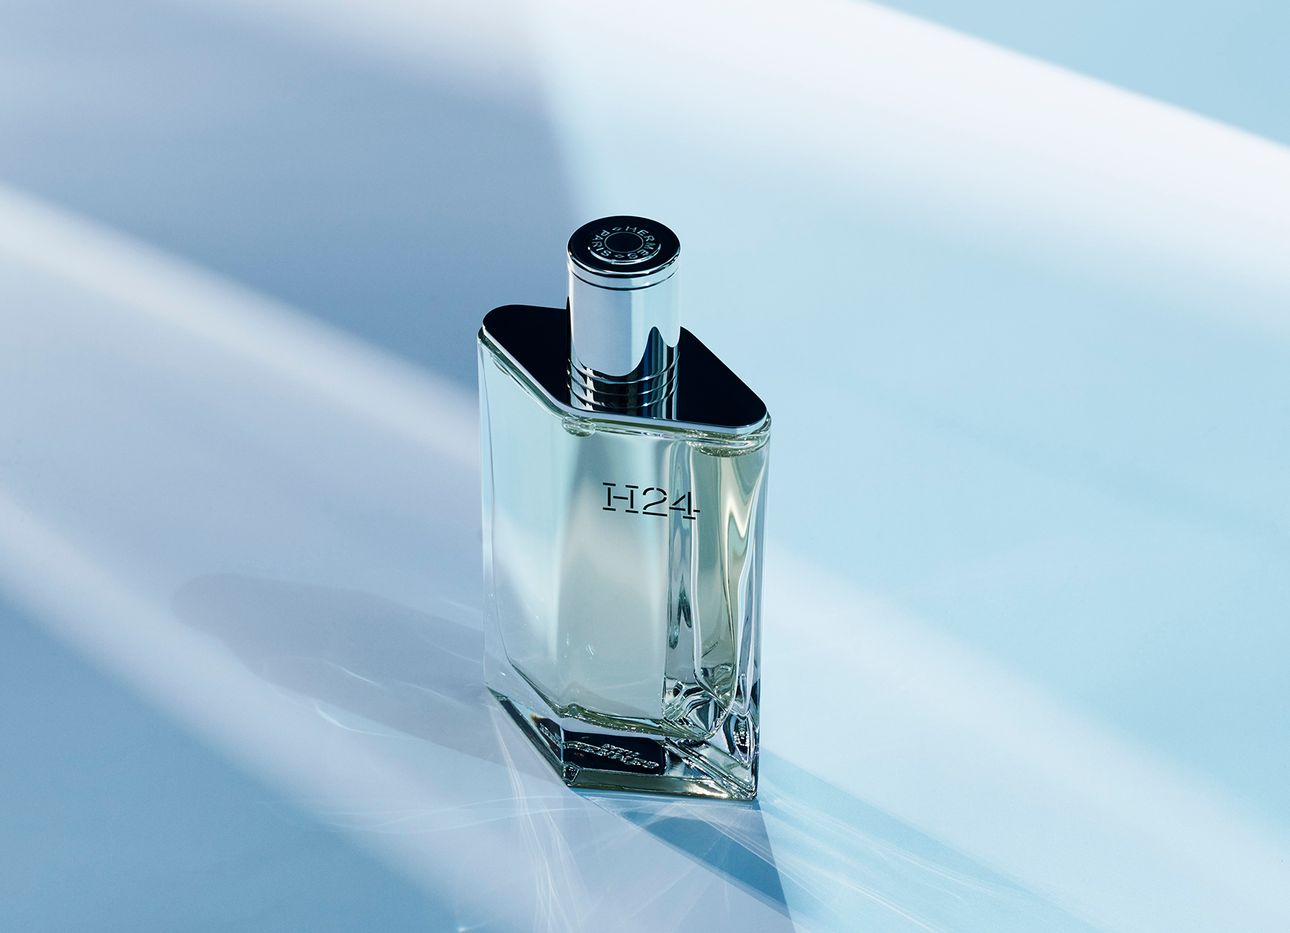 A bottle of Hermés's H24 in futuristic lighting.